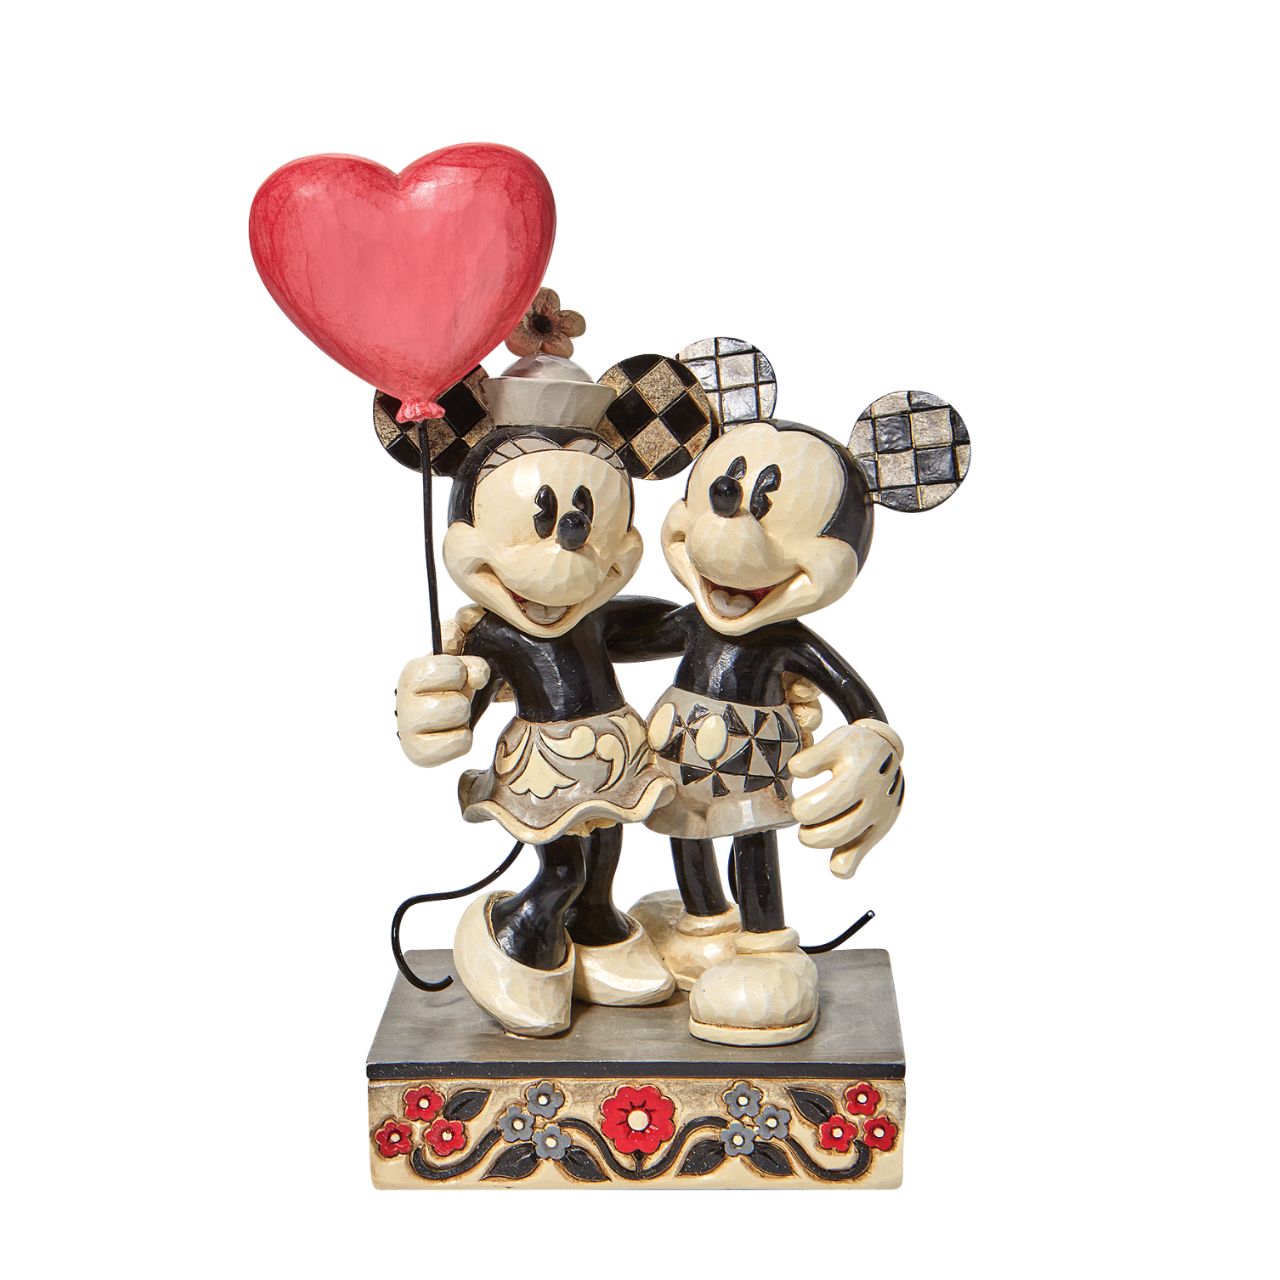 Jim Shore Disney Mickey and Minnie Heart Figurine  "Love is in the Air" Celebrate love with the original Disney couple with this sweet relief by Jim Shore. Mickey Mouse hugs his girl close in this romantic figurine with classic Jim Shore rosemaling. Minnie holds on tight to a heart balloon and her valentine.